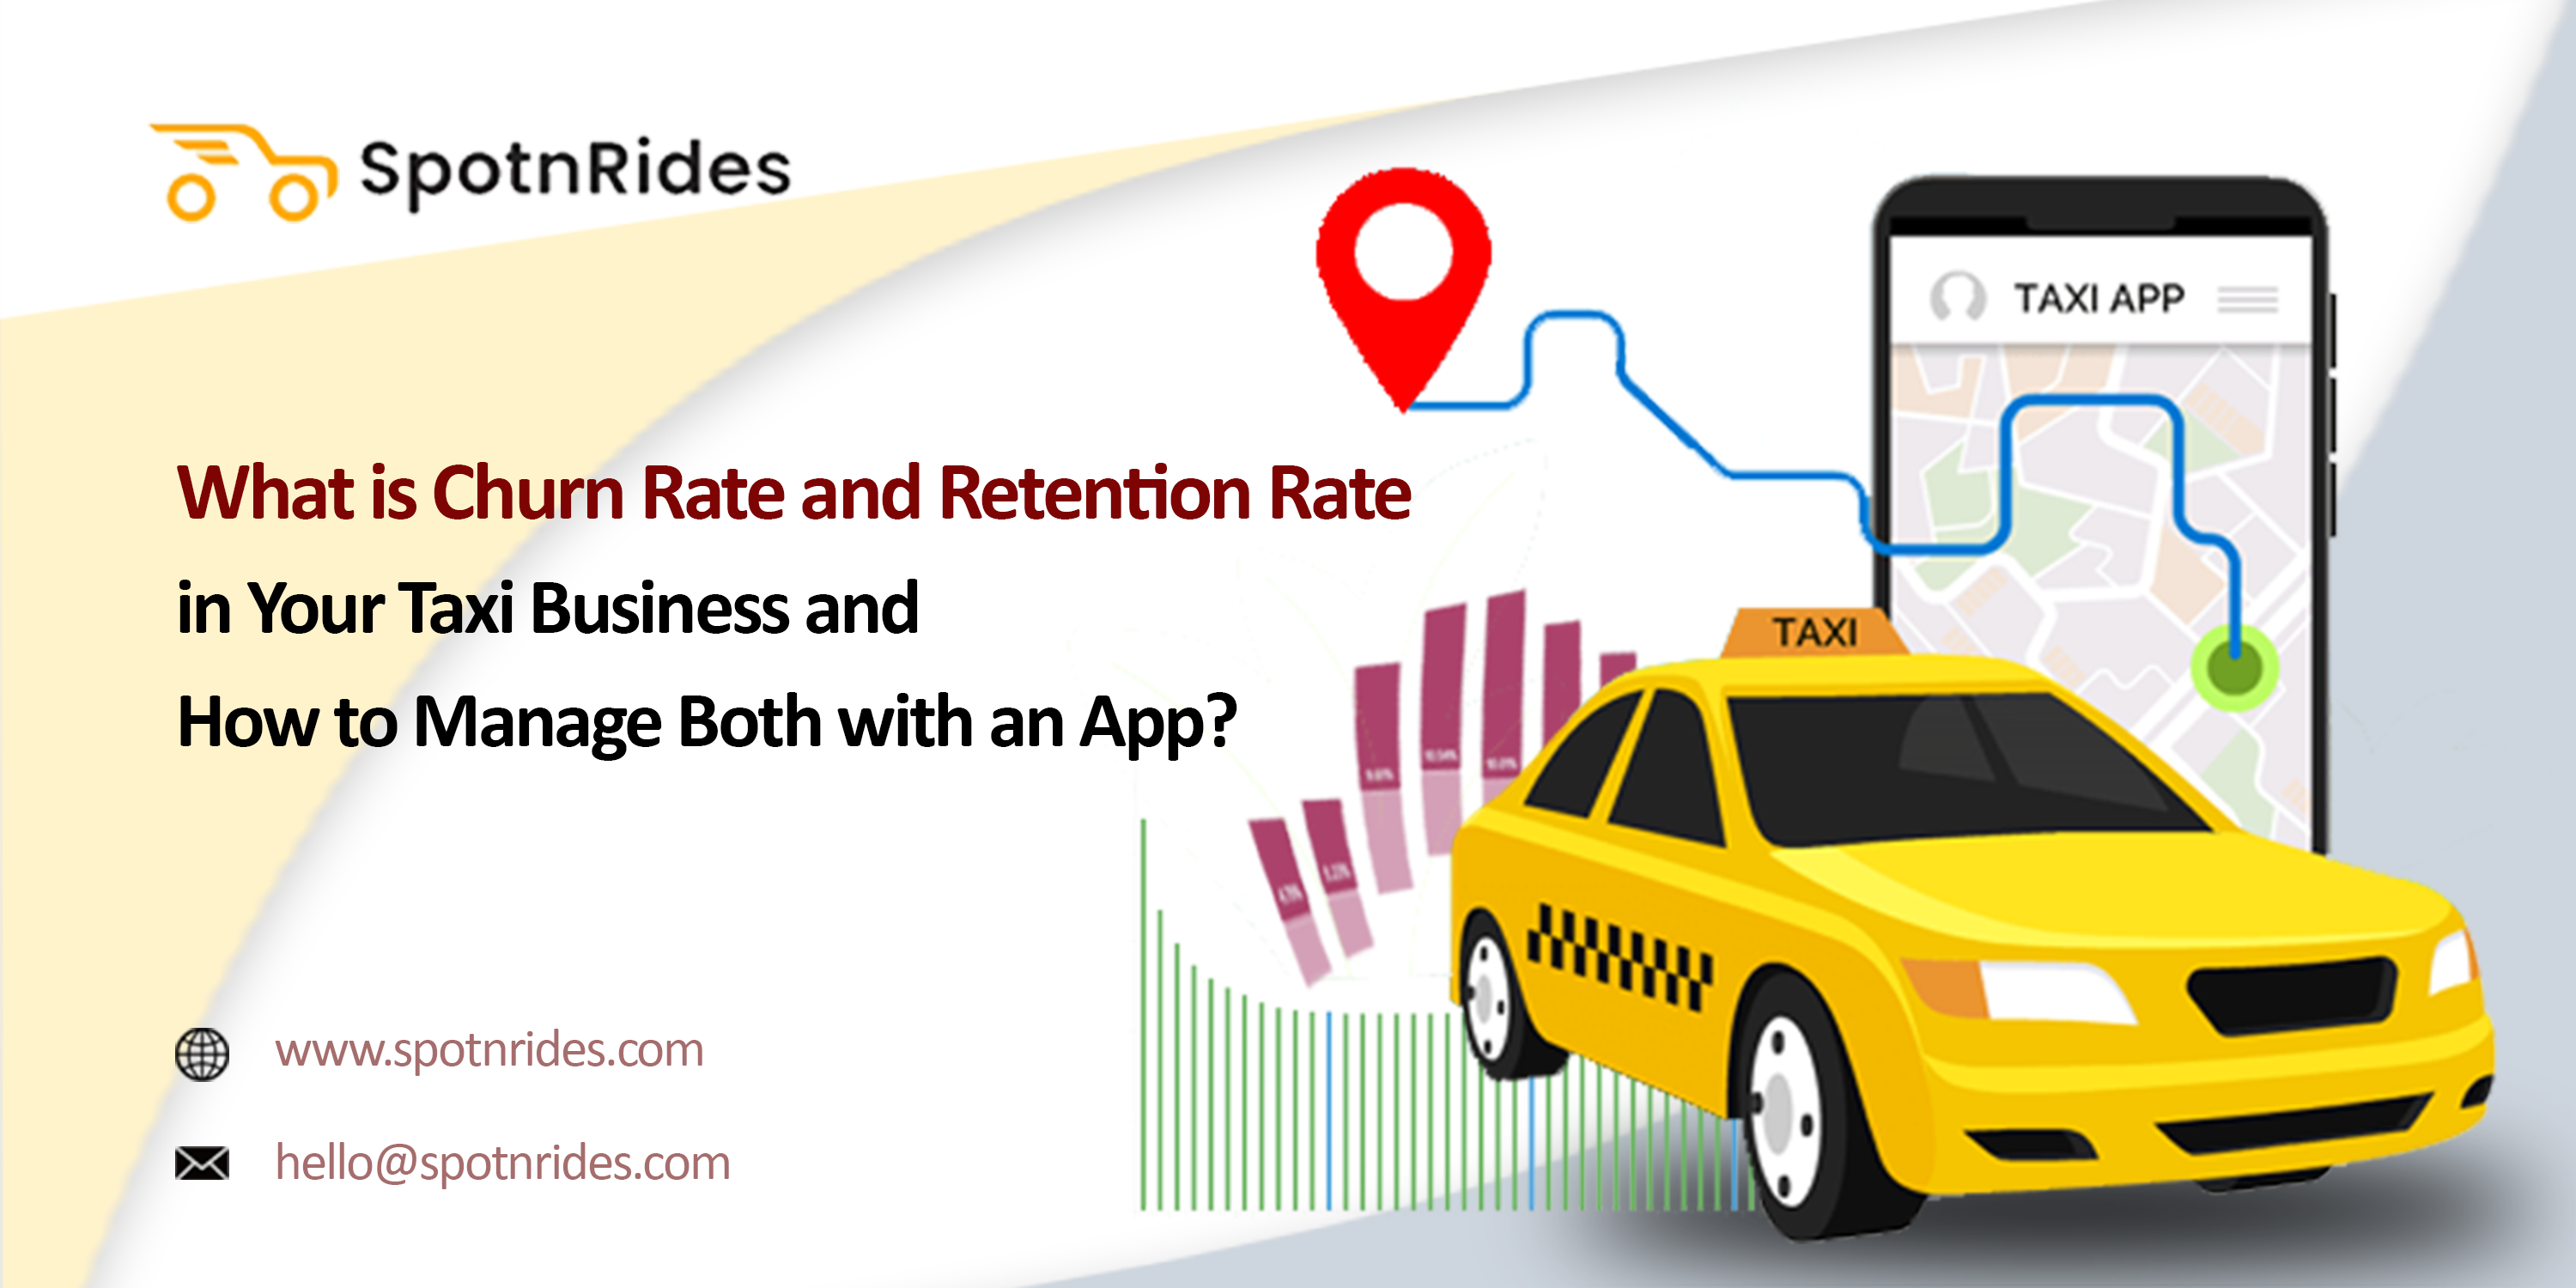 taxi booking app like Uber